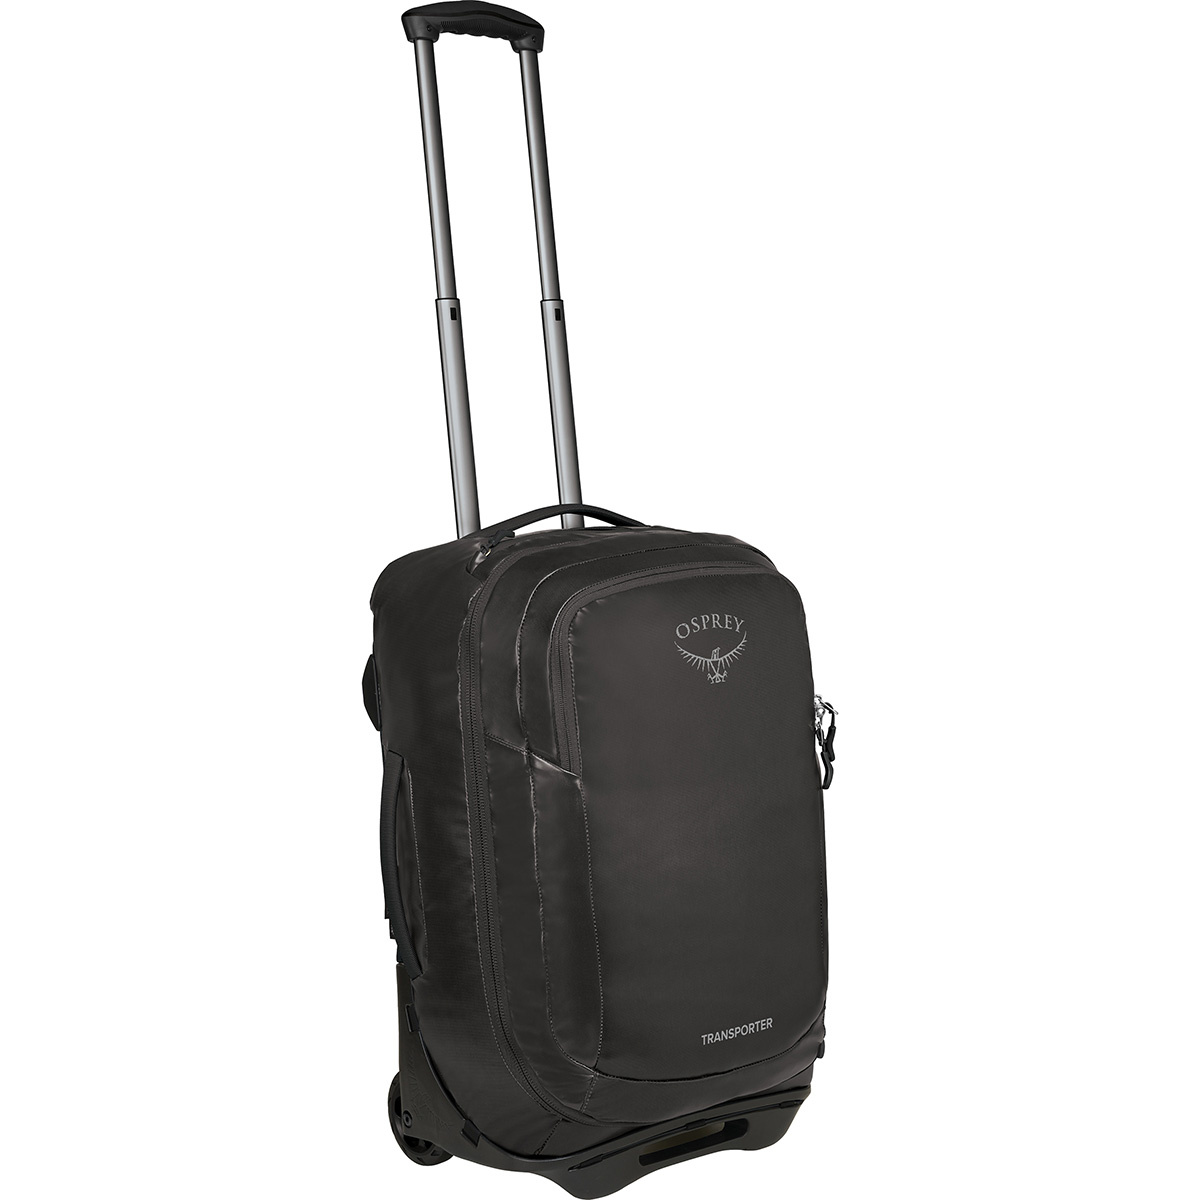 Image of Osprey Trolley Rolling Transporter Carry-On